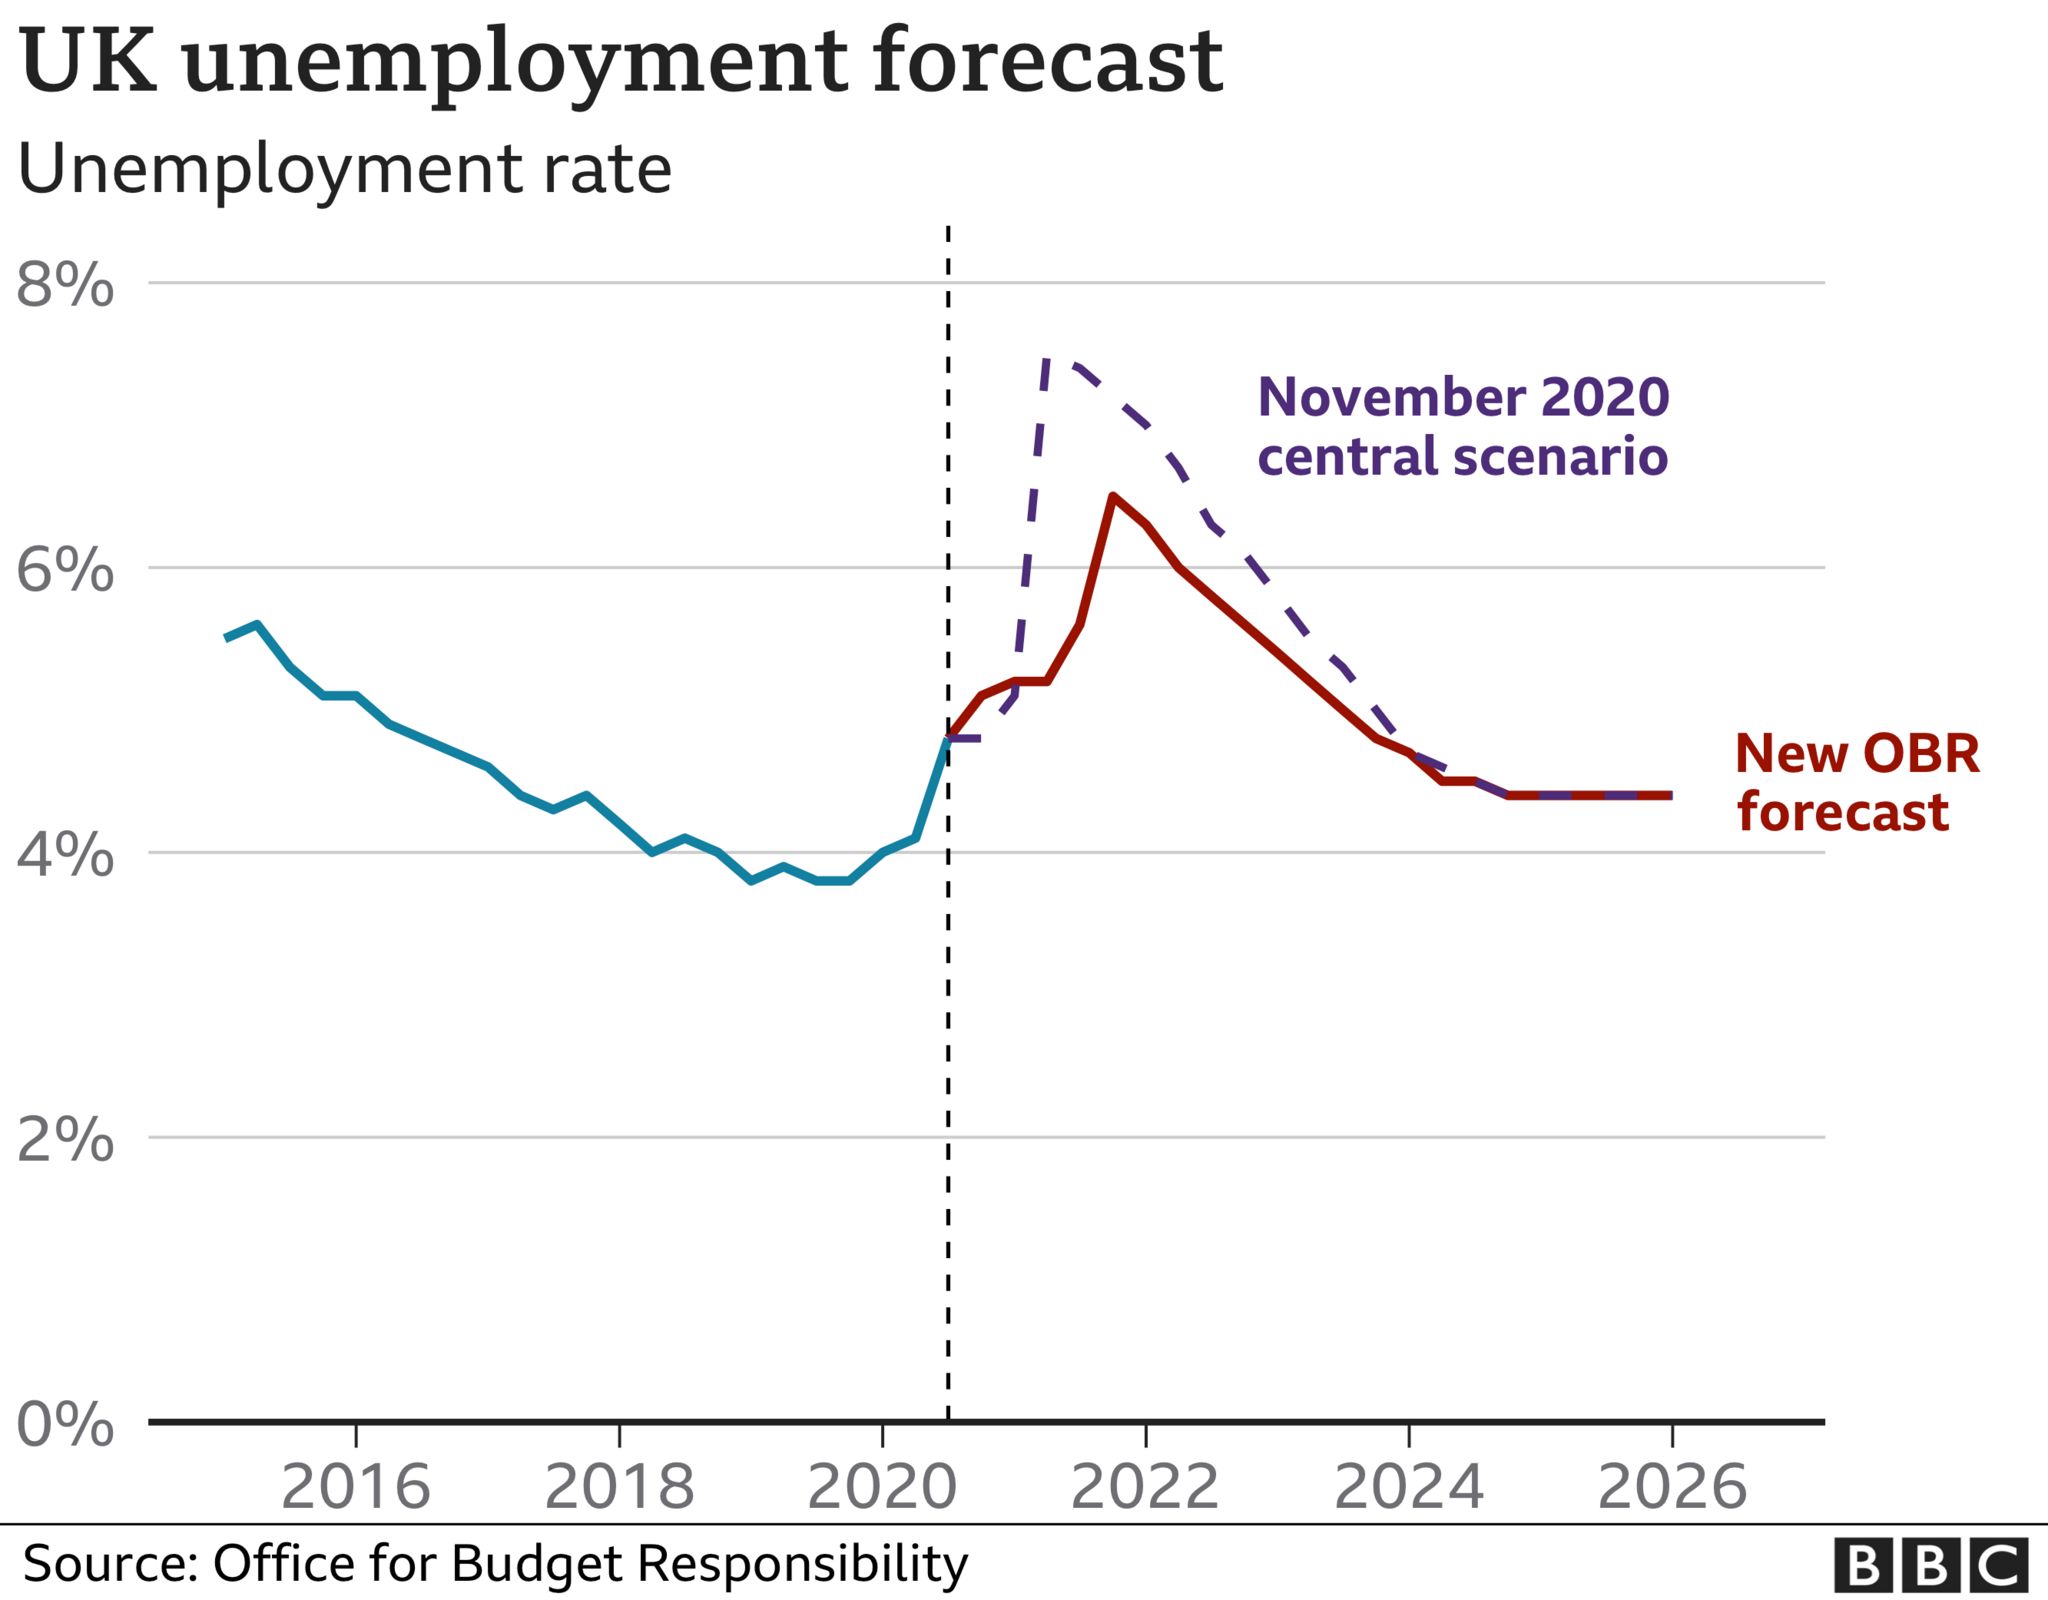 Unemployment is expected to peak at around 6.5% at the end of 2021, lower than previously forecast by the OBR